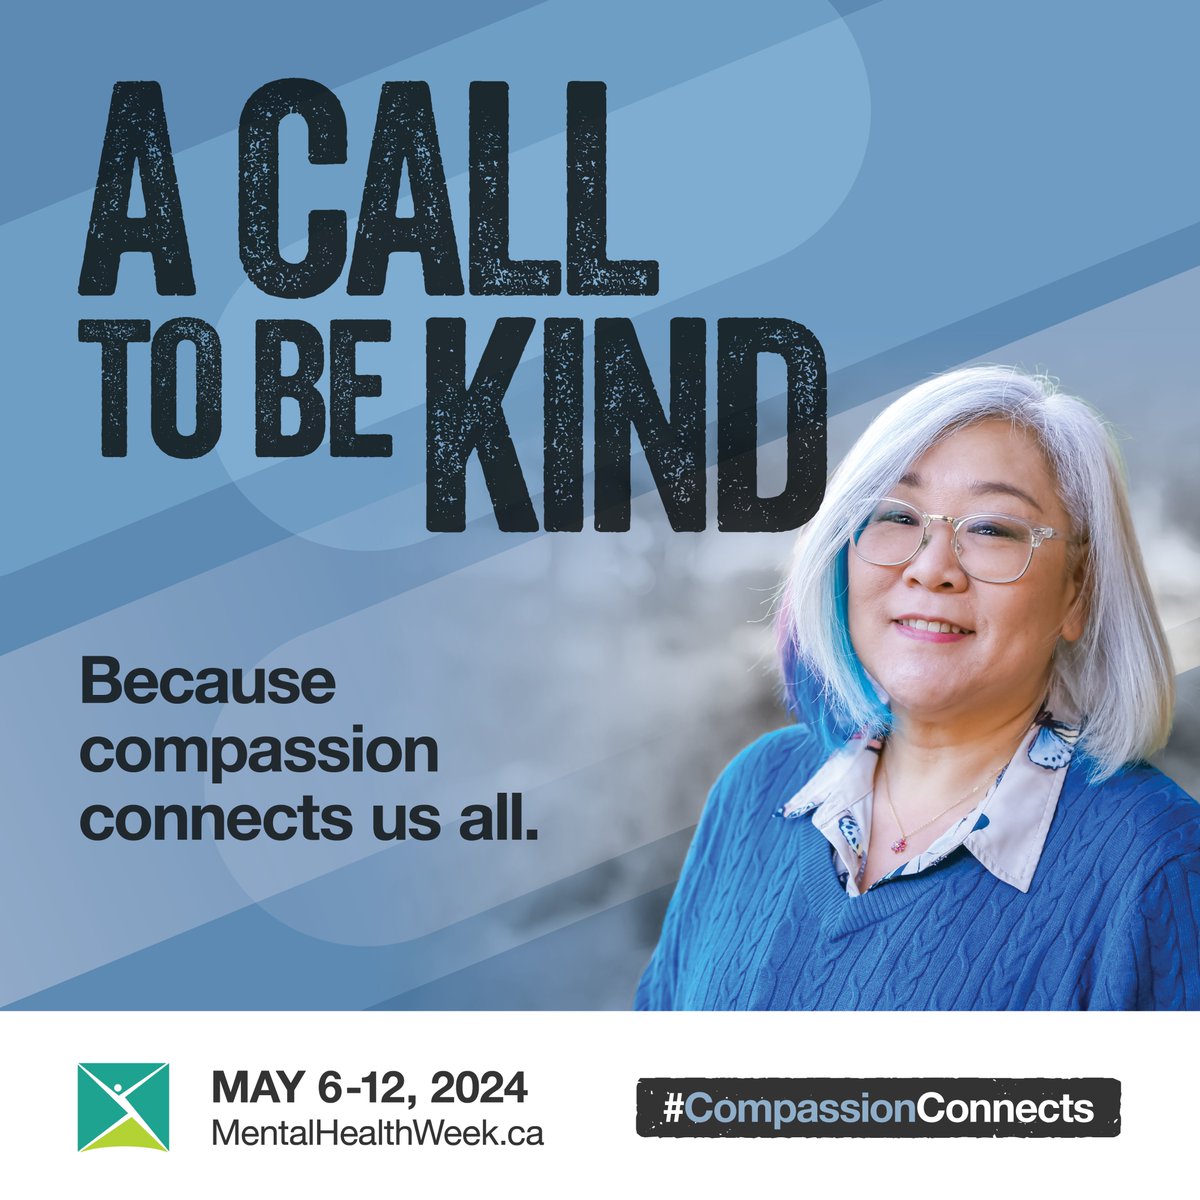 Today is the start of @CMHANL’s #MentalHealthWeek. Compassion isn't just about being kind to others, it's about extending that same kindness to ourselves. Visit mentalhealthweek.ca to learn more. #CompassionConnects